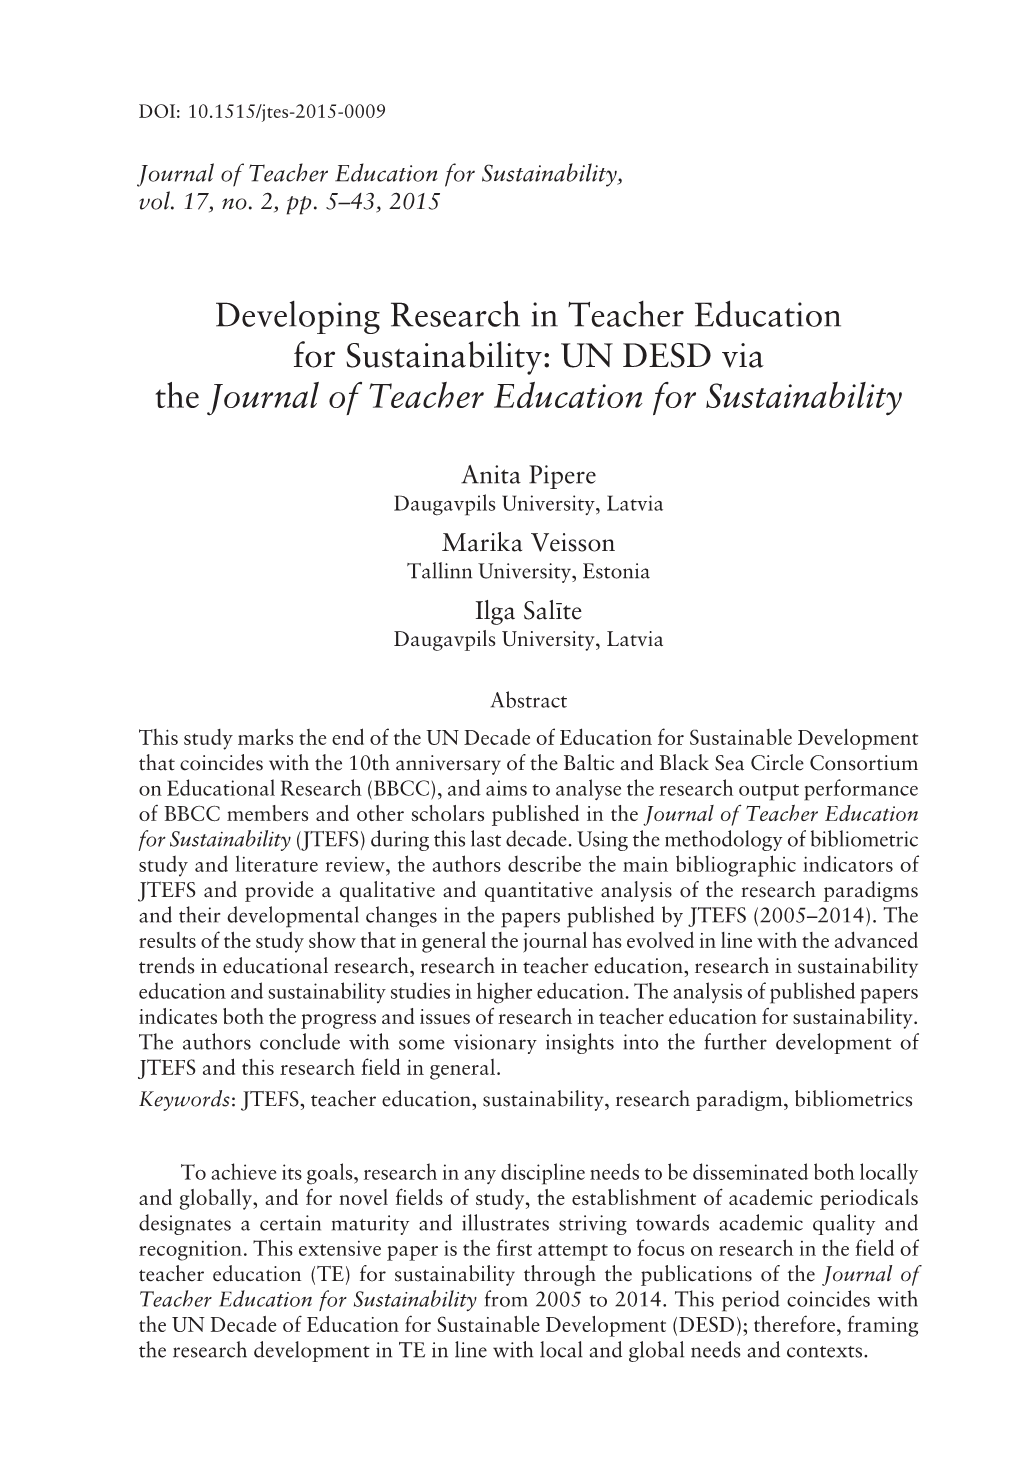 Journal of Teacher Education for Sustainability, Vol